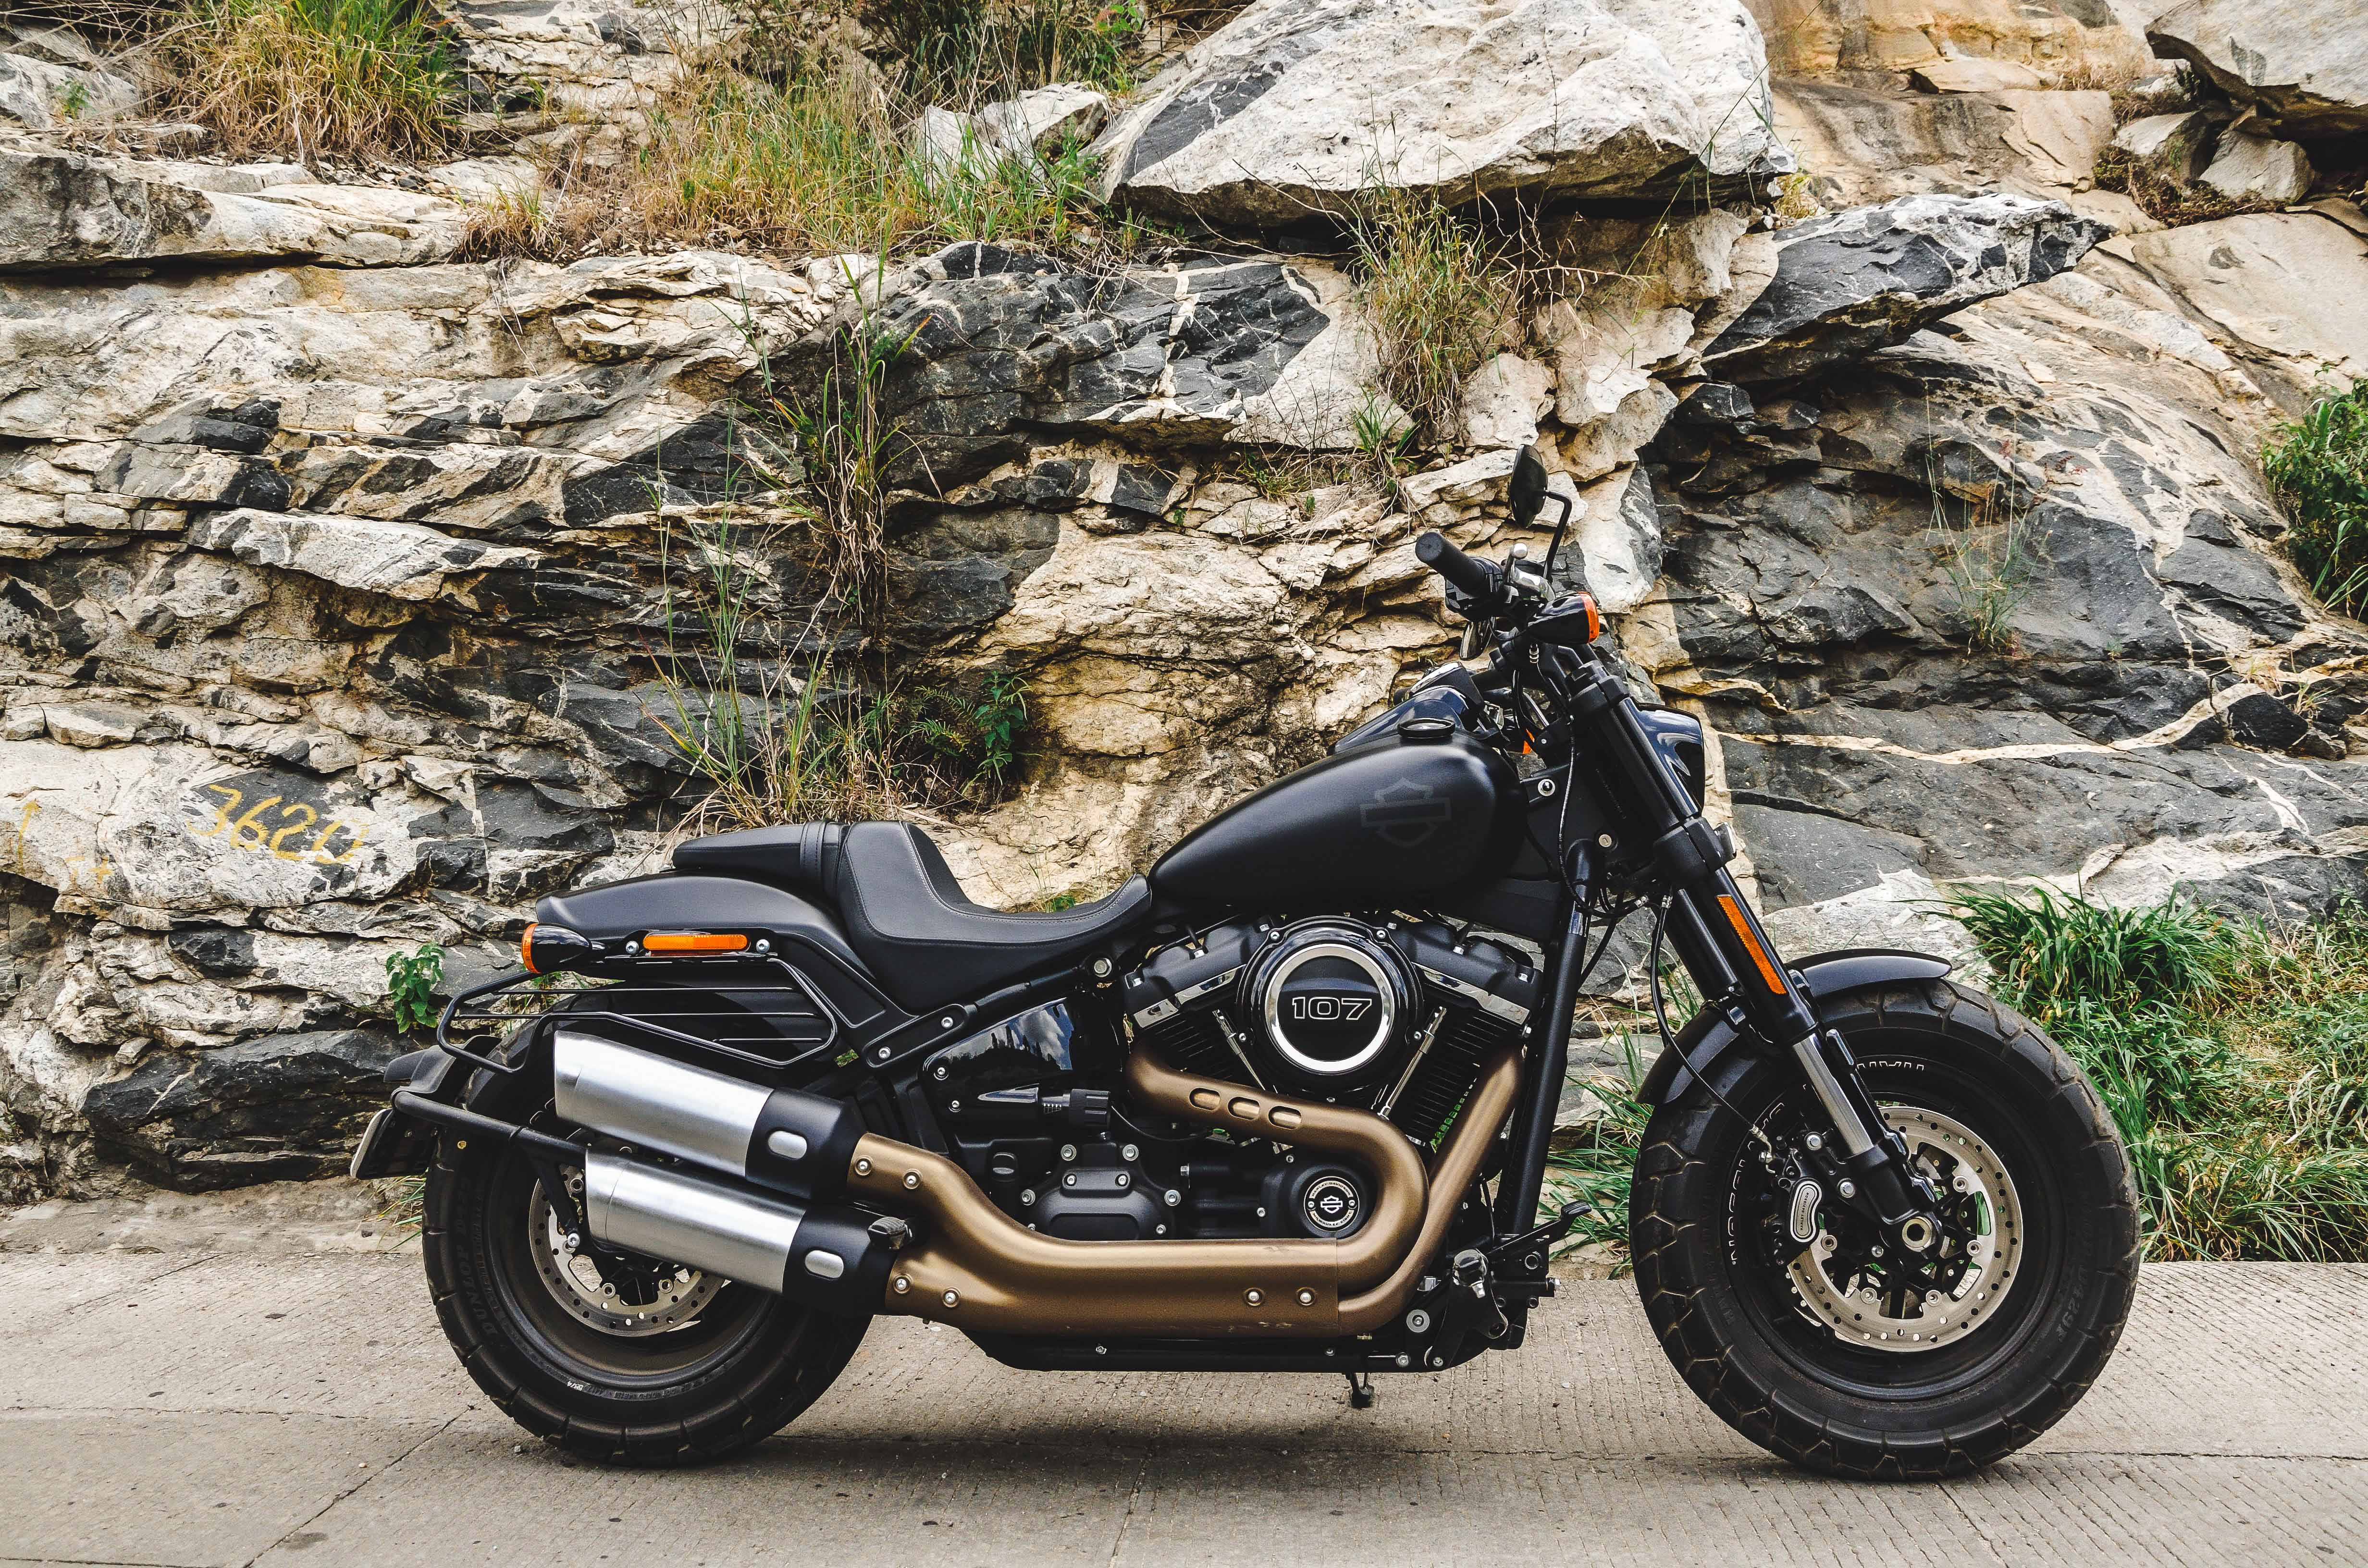 2018 Harley Davidson Fatbob: The Muscle Car of Motorcycles | Pitstop